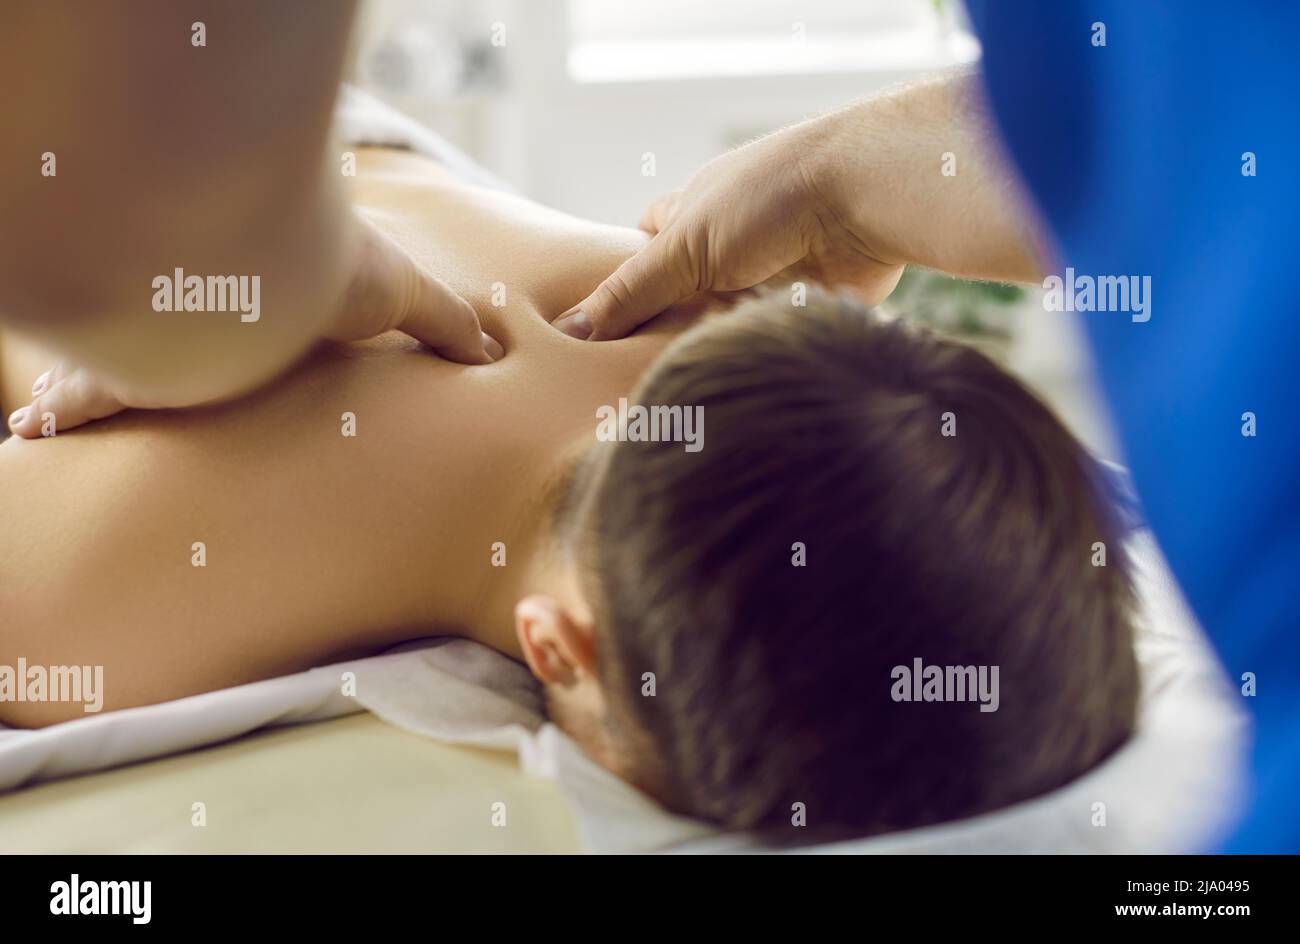 Close up of male masseur hands doing acupuncture healthy osteopathic body massage to young man. Stock Photo